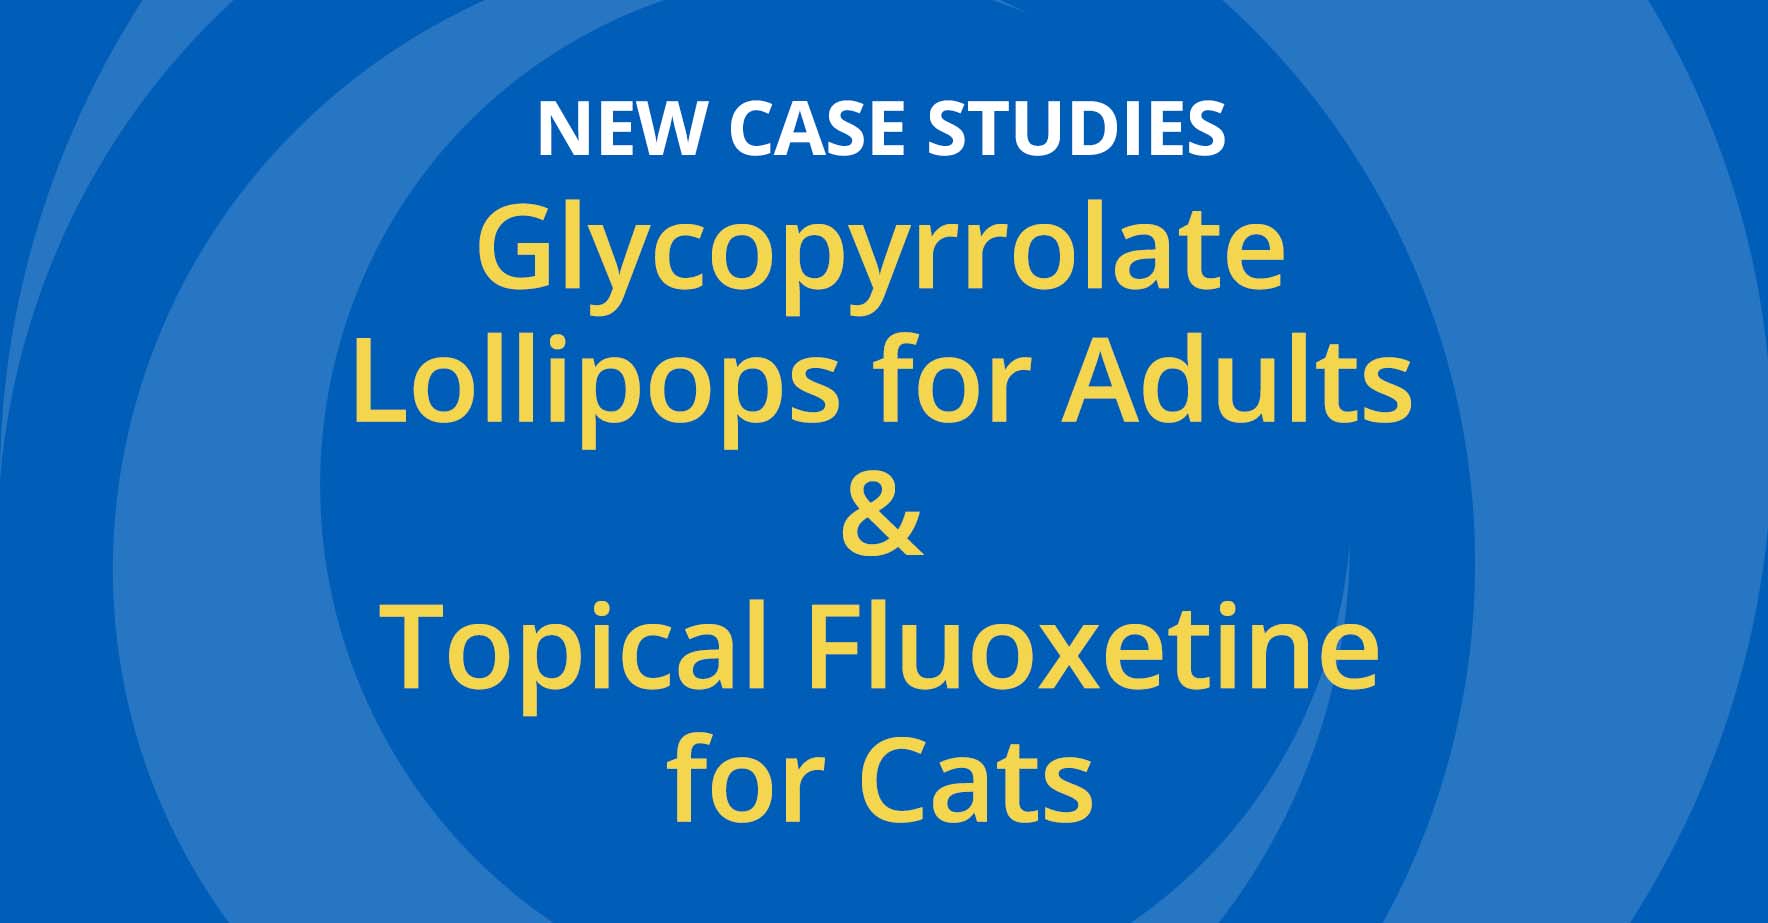 Glycopyrrolate_Lollipops_for_Adults_and_Topical_Fluoxetine_for_Cats_New_Case_Studies.jpg